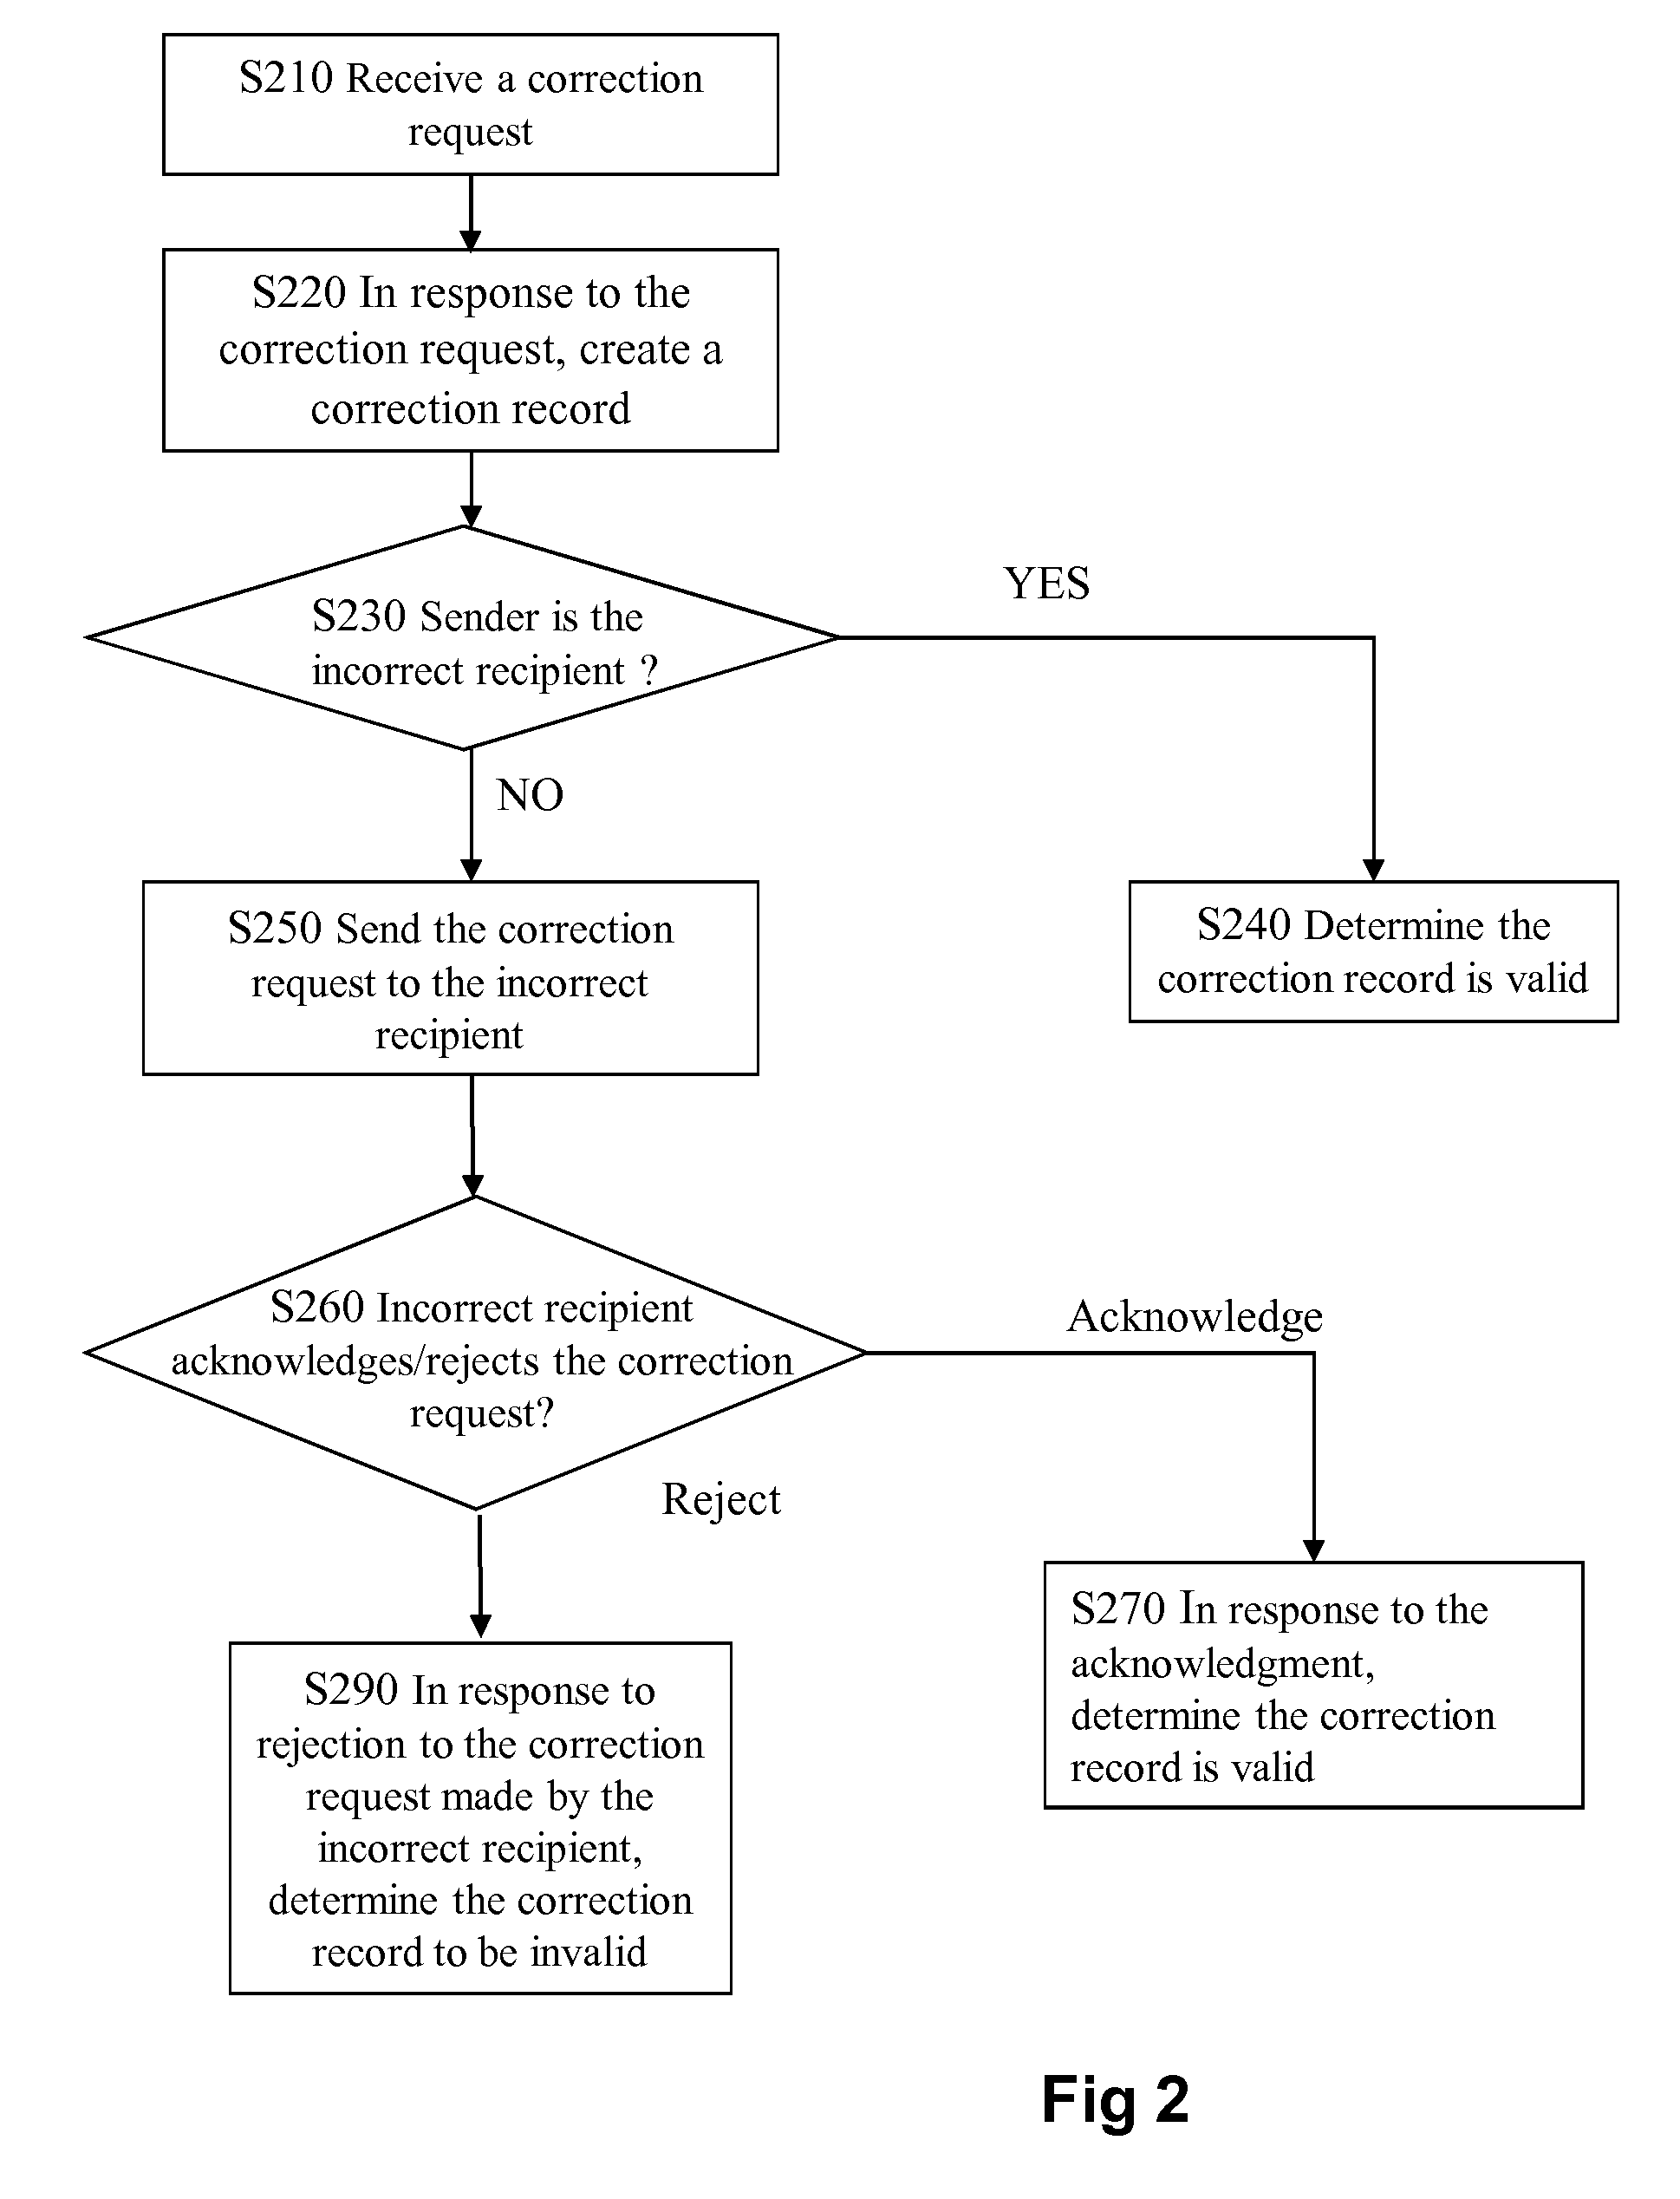 Method and system for processing emails